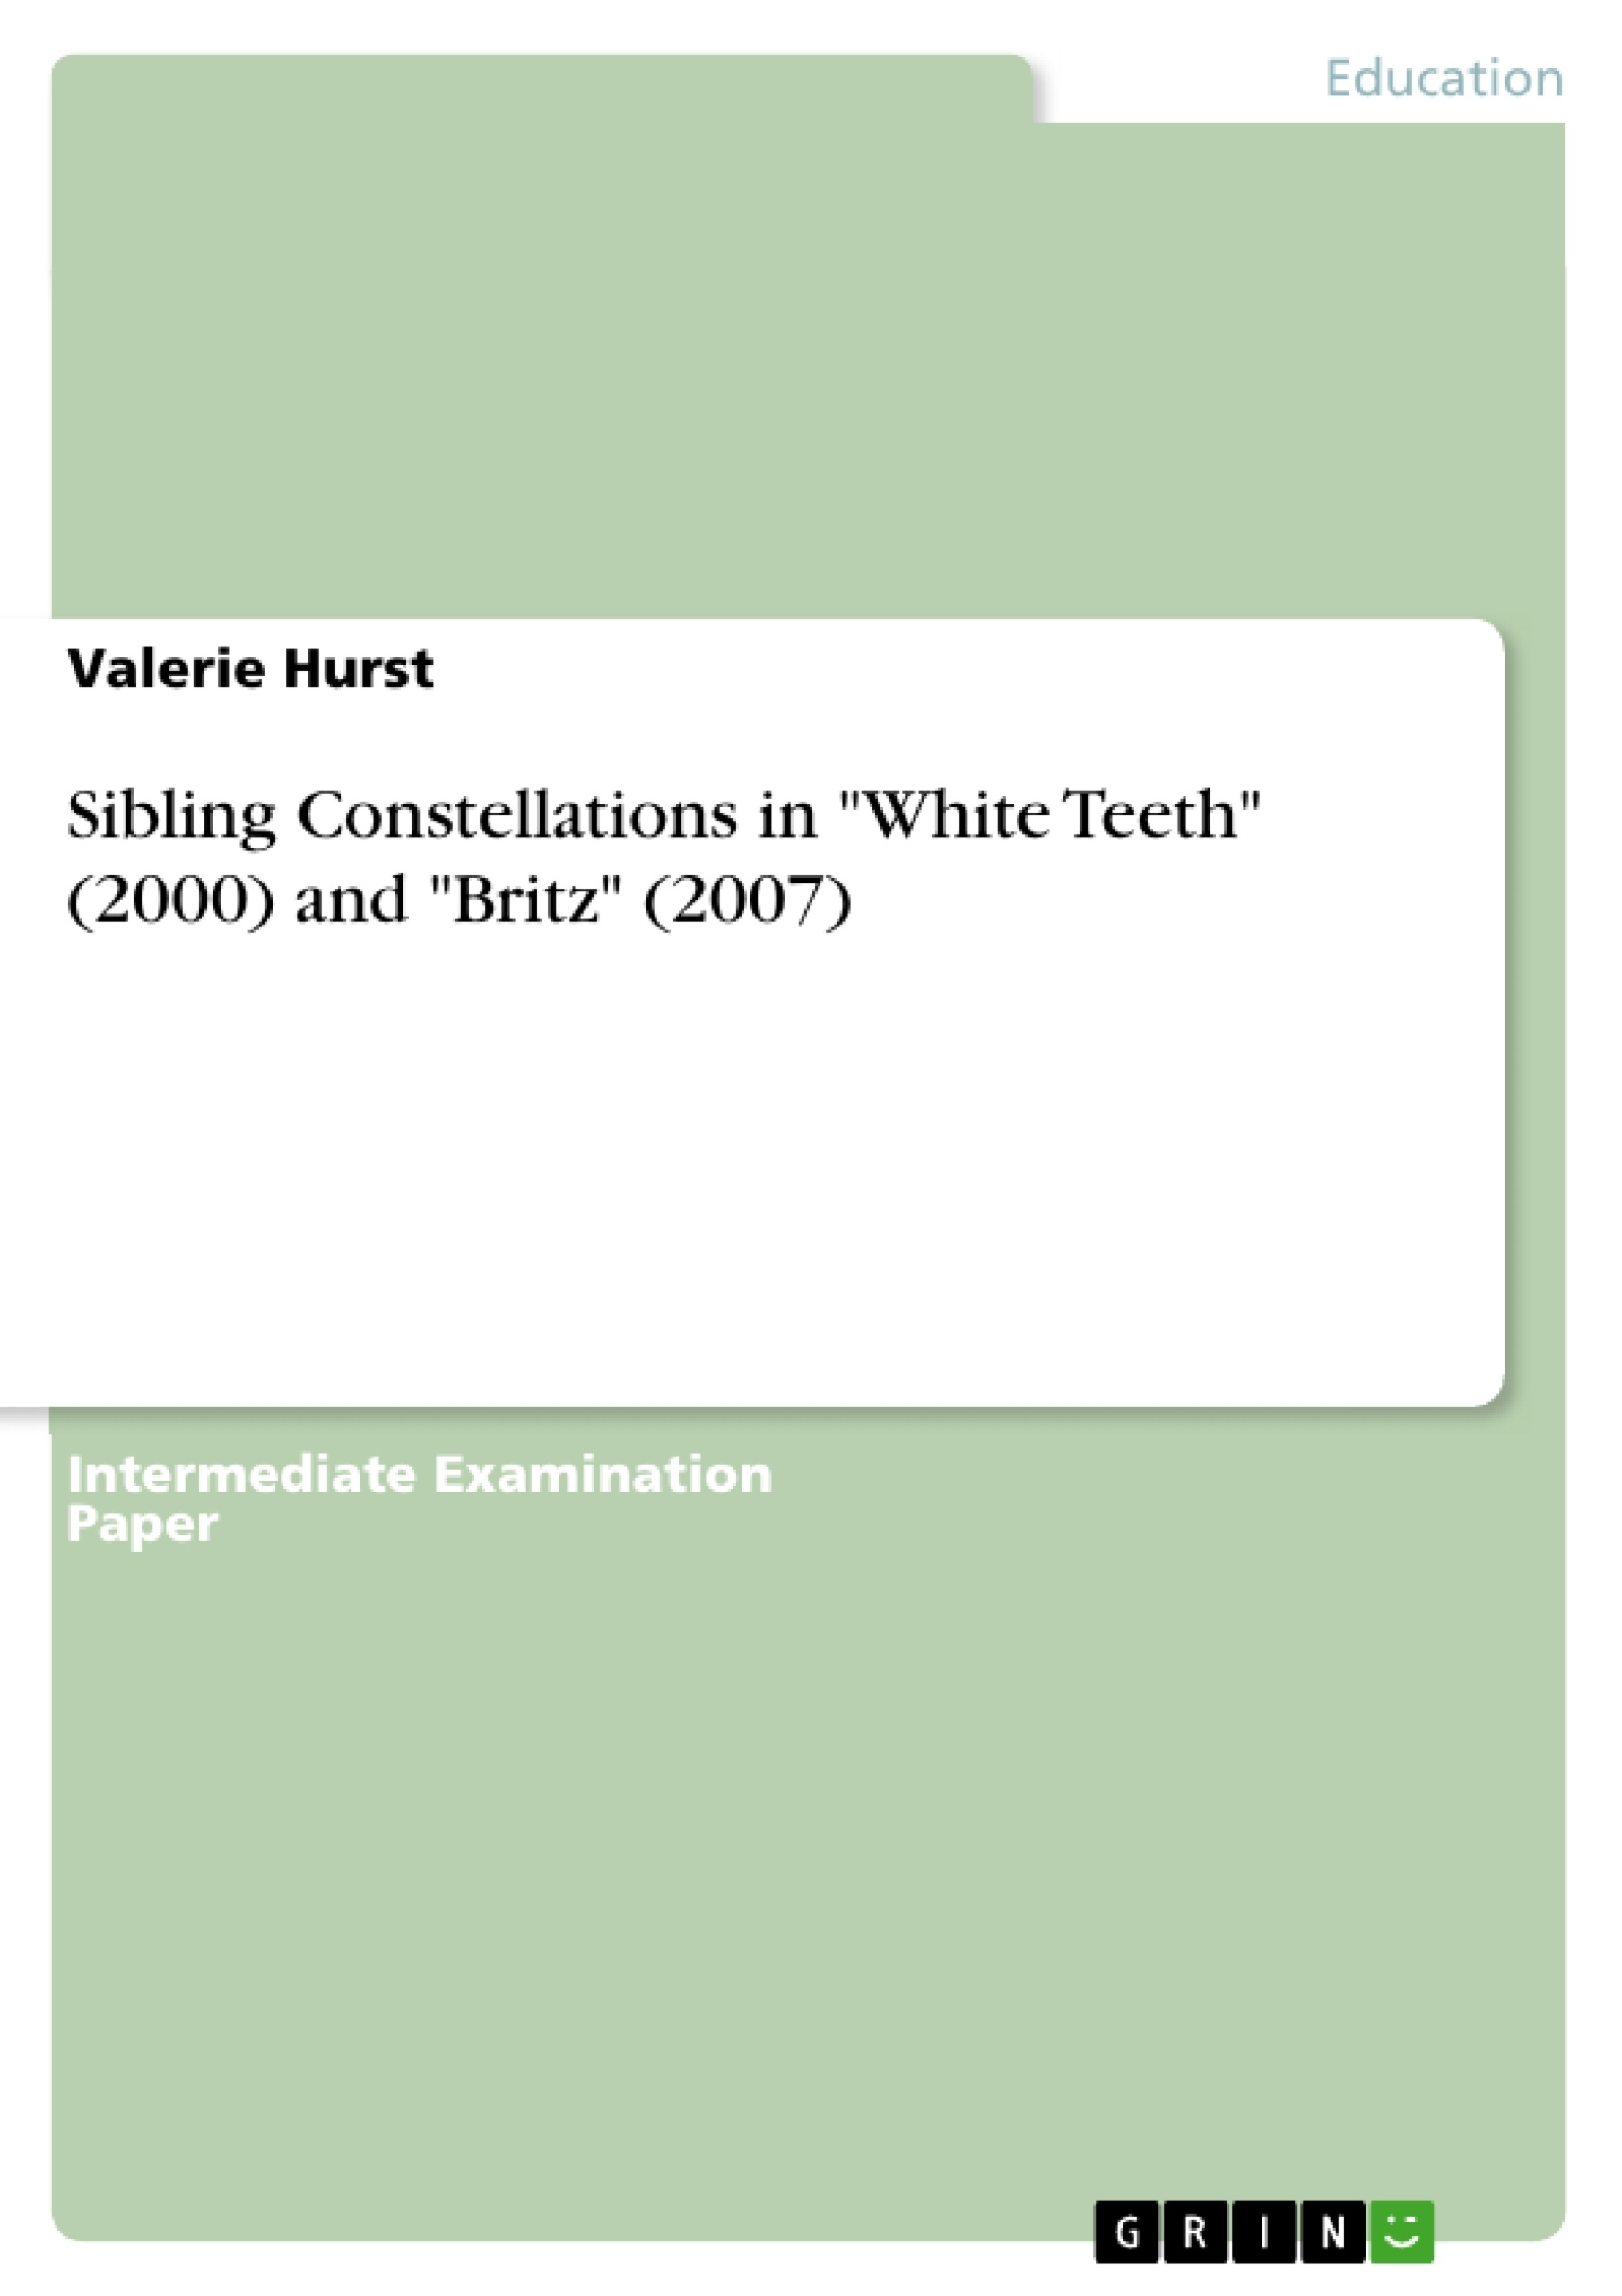 Titel: Sibling Constellations in "White Teeth" (2000) and "Britz" (2007)